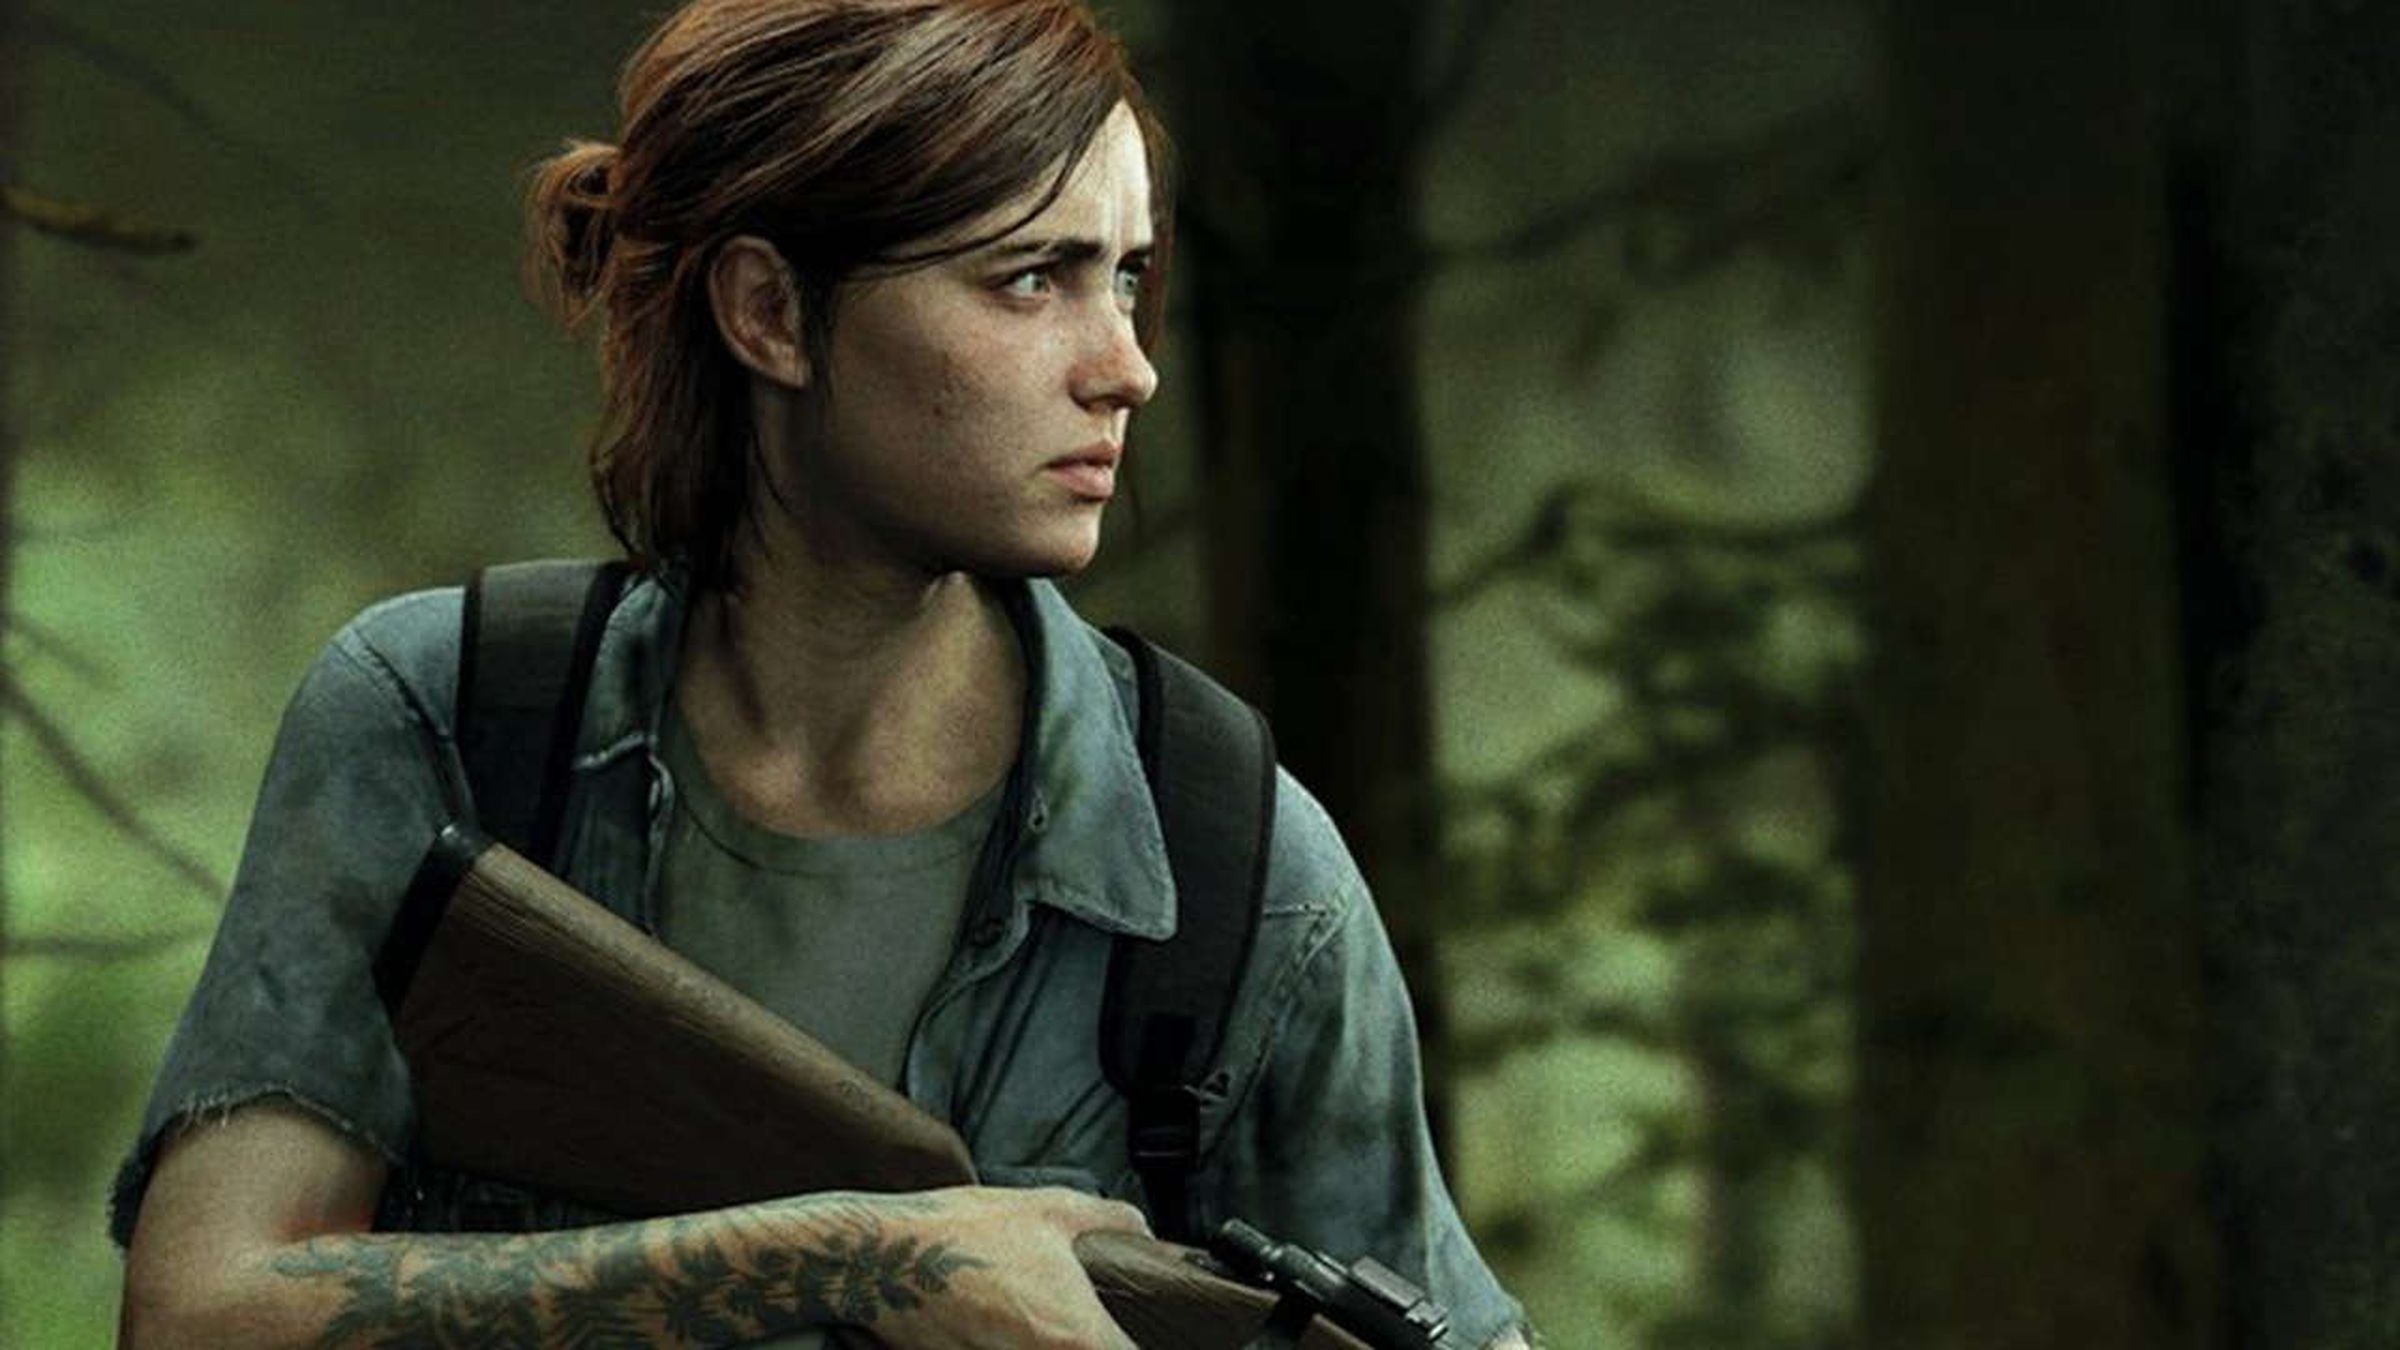 Ellie, a tattoo visible on her arm, holds a gun and watches something in the distance warily.